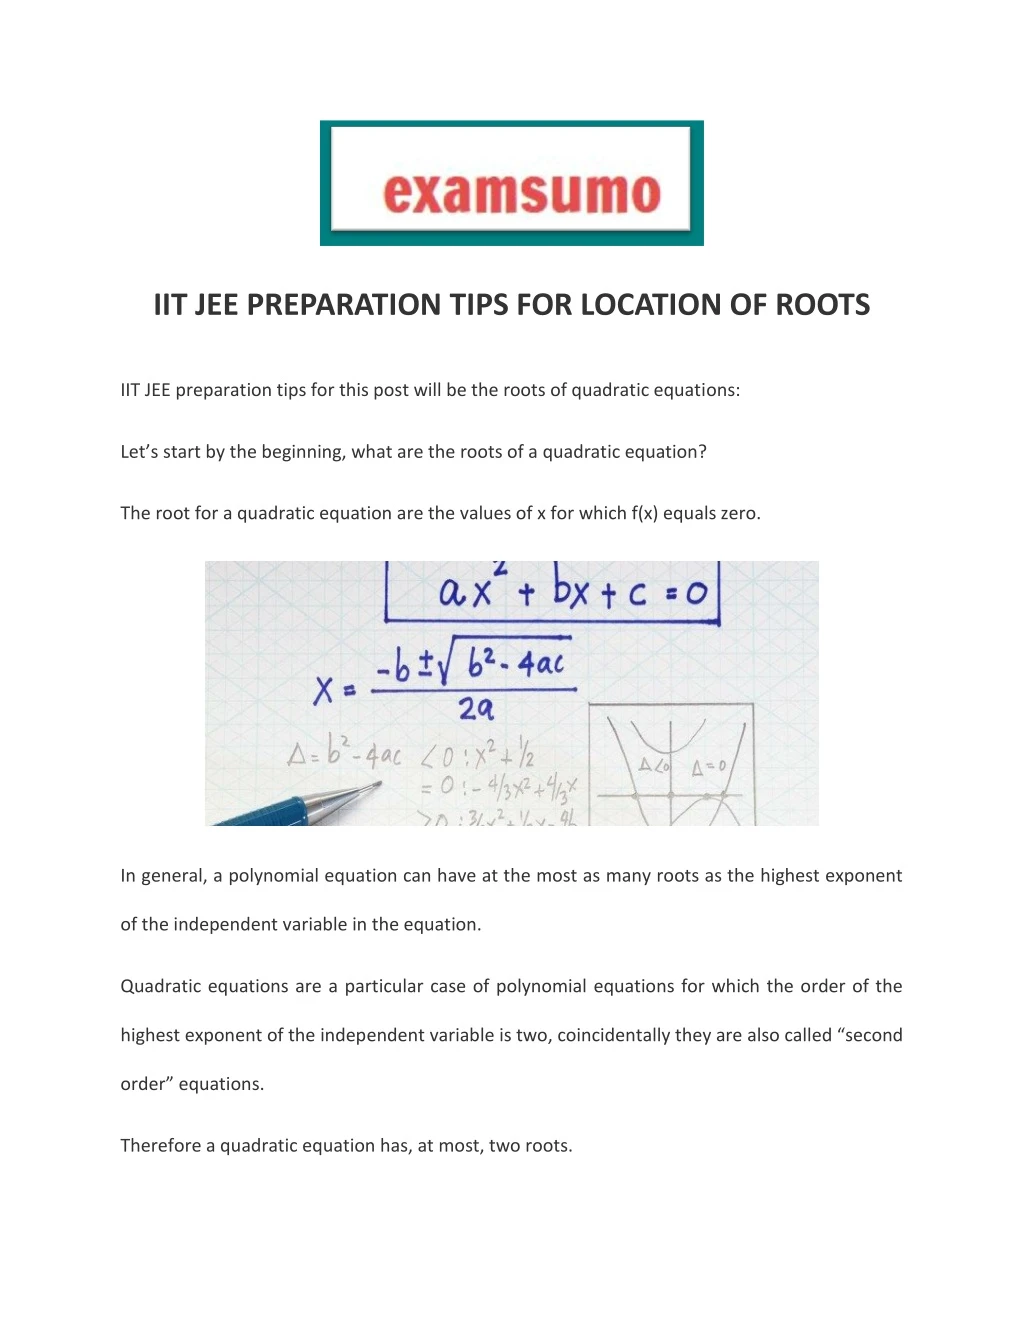 iit jee preparation tips for location of roots